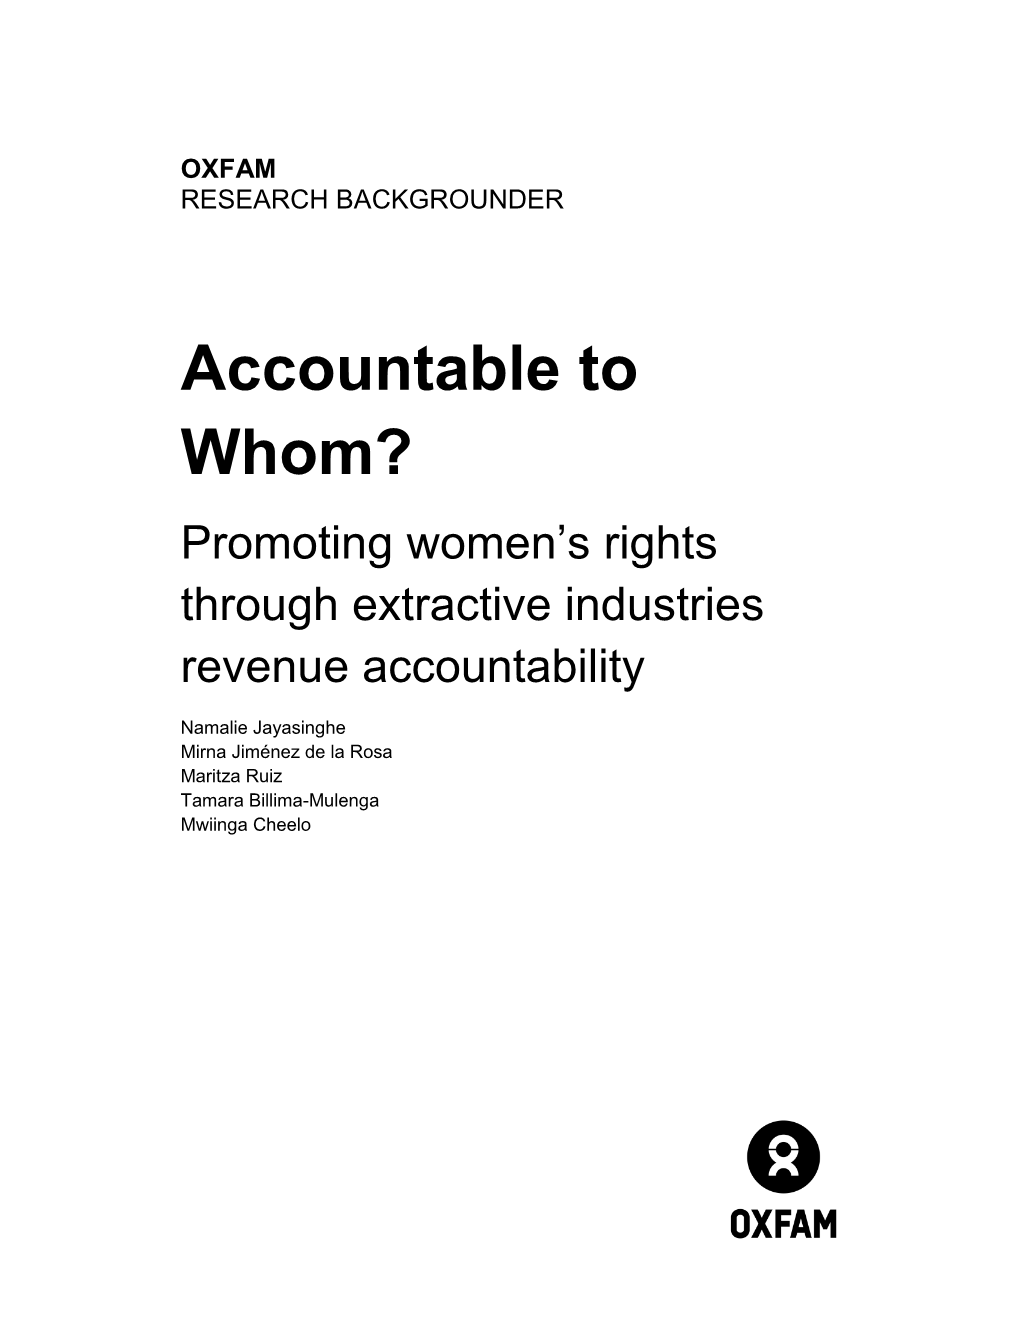 Accountable to Whom? Promoting Women’S Rights Through Extractive Industries Revenue Accountability